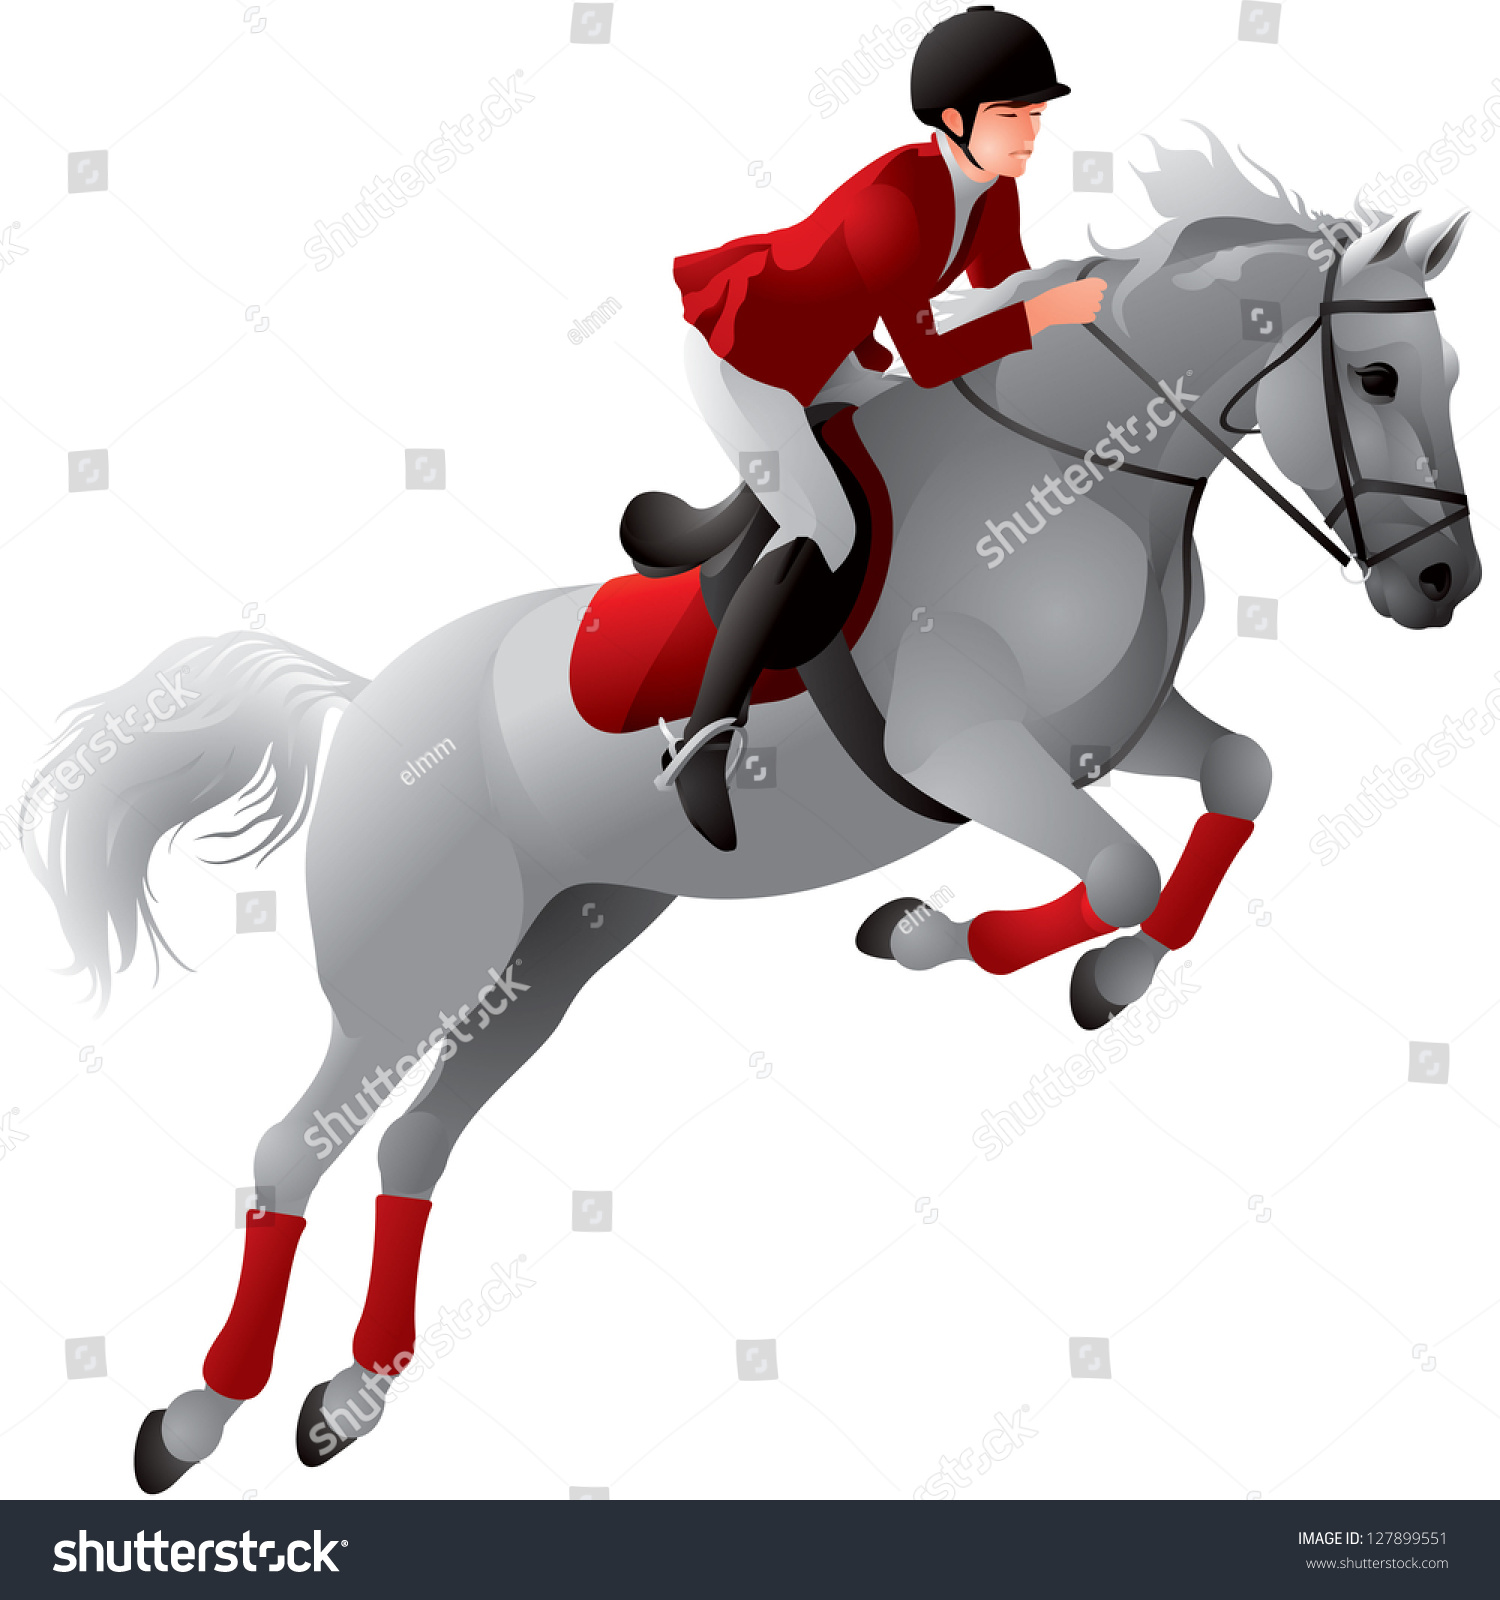 horse jumping clipart - photo #37